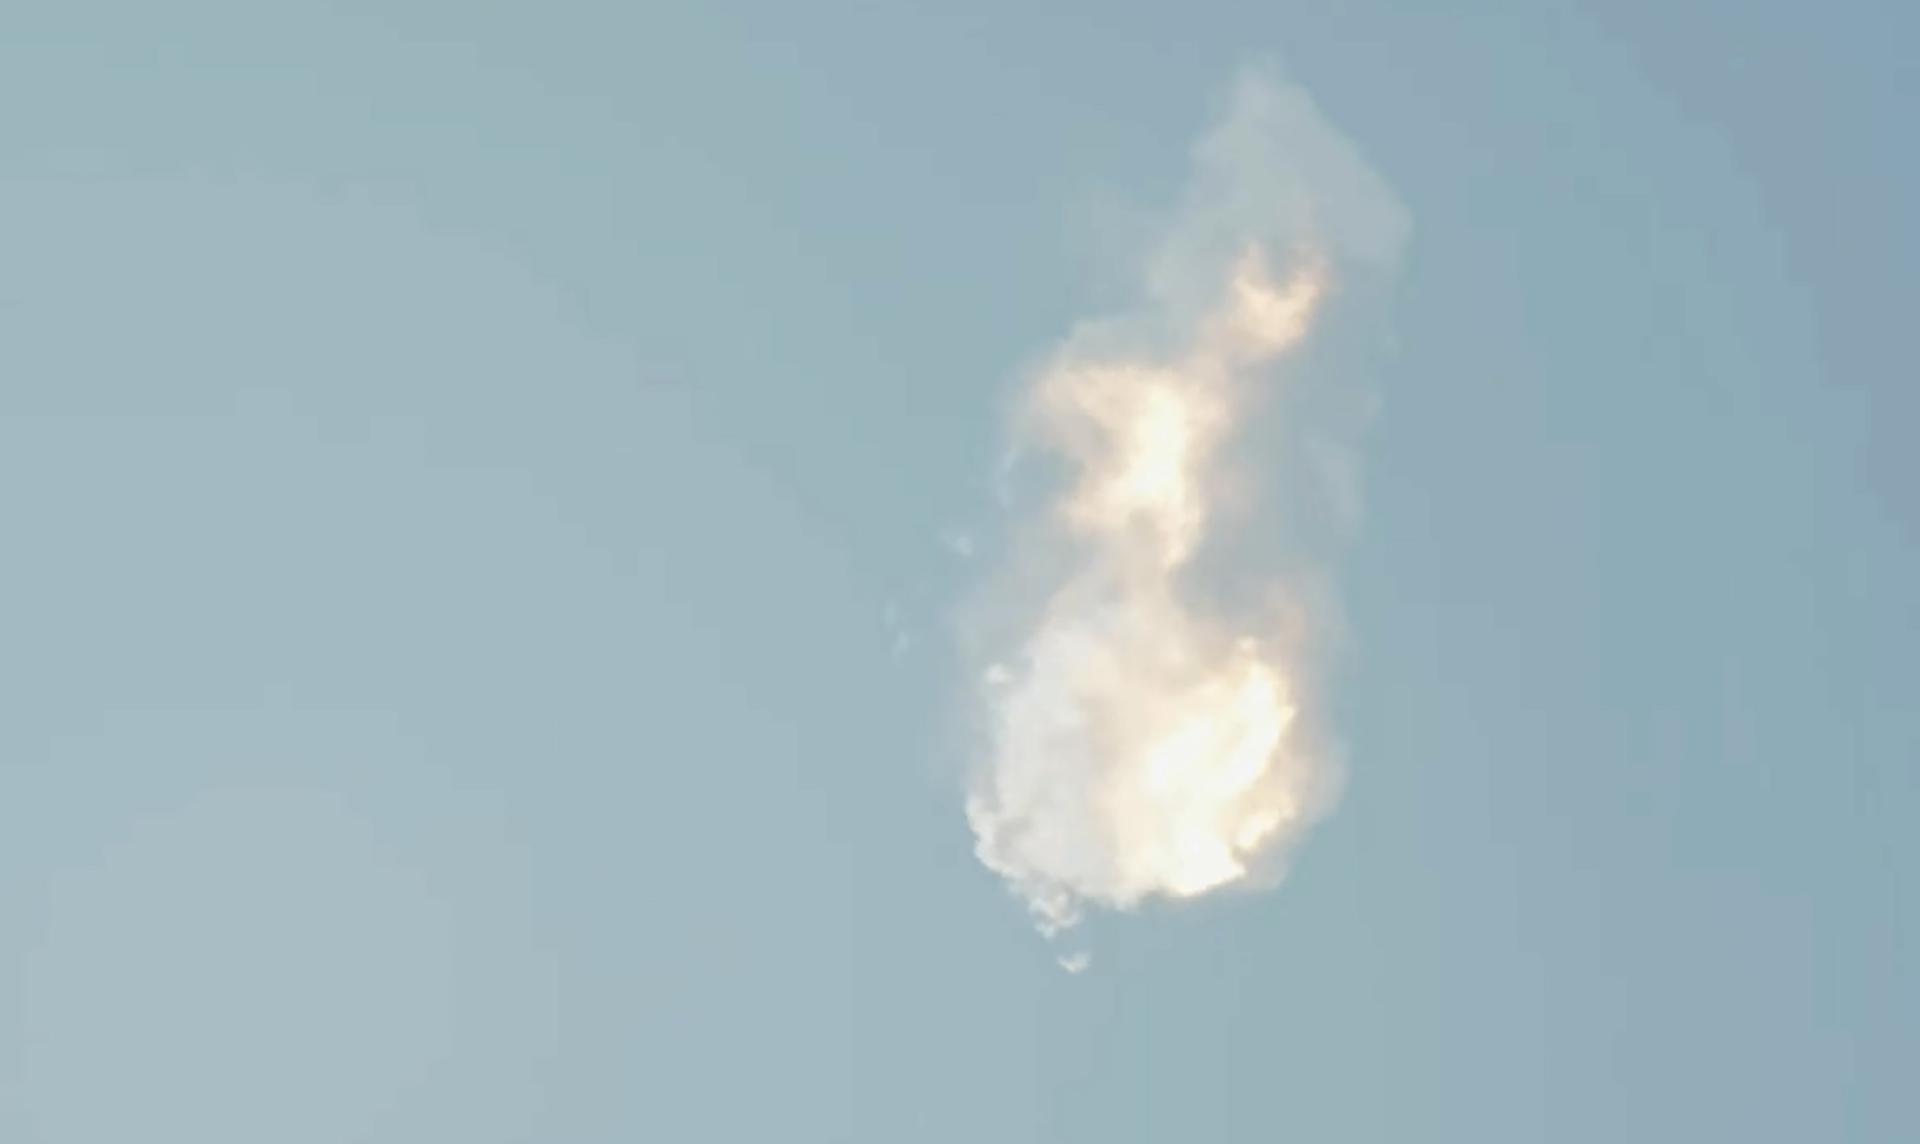 Photo provided by SpaceX showing its Starship rocket exploding on an uncrewed test flight over Gulf of Mexico after launching from Texas on April 20, 2023. EFE/SpaceX